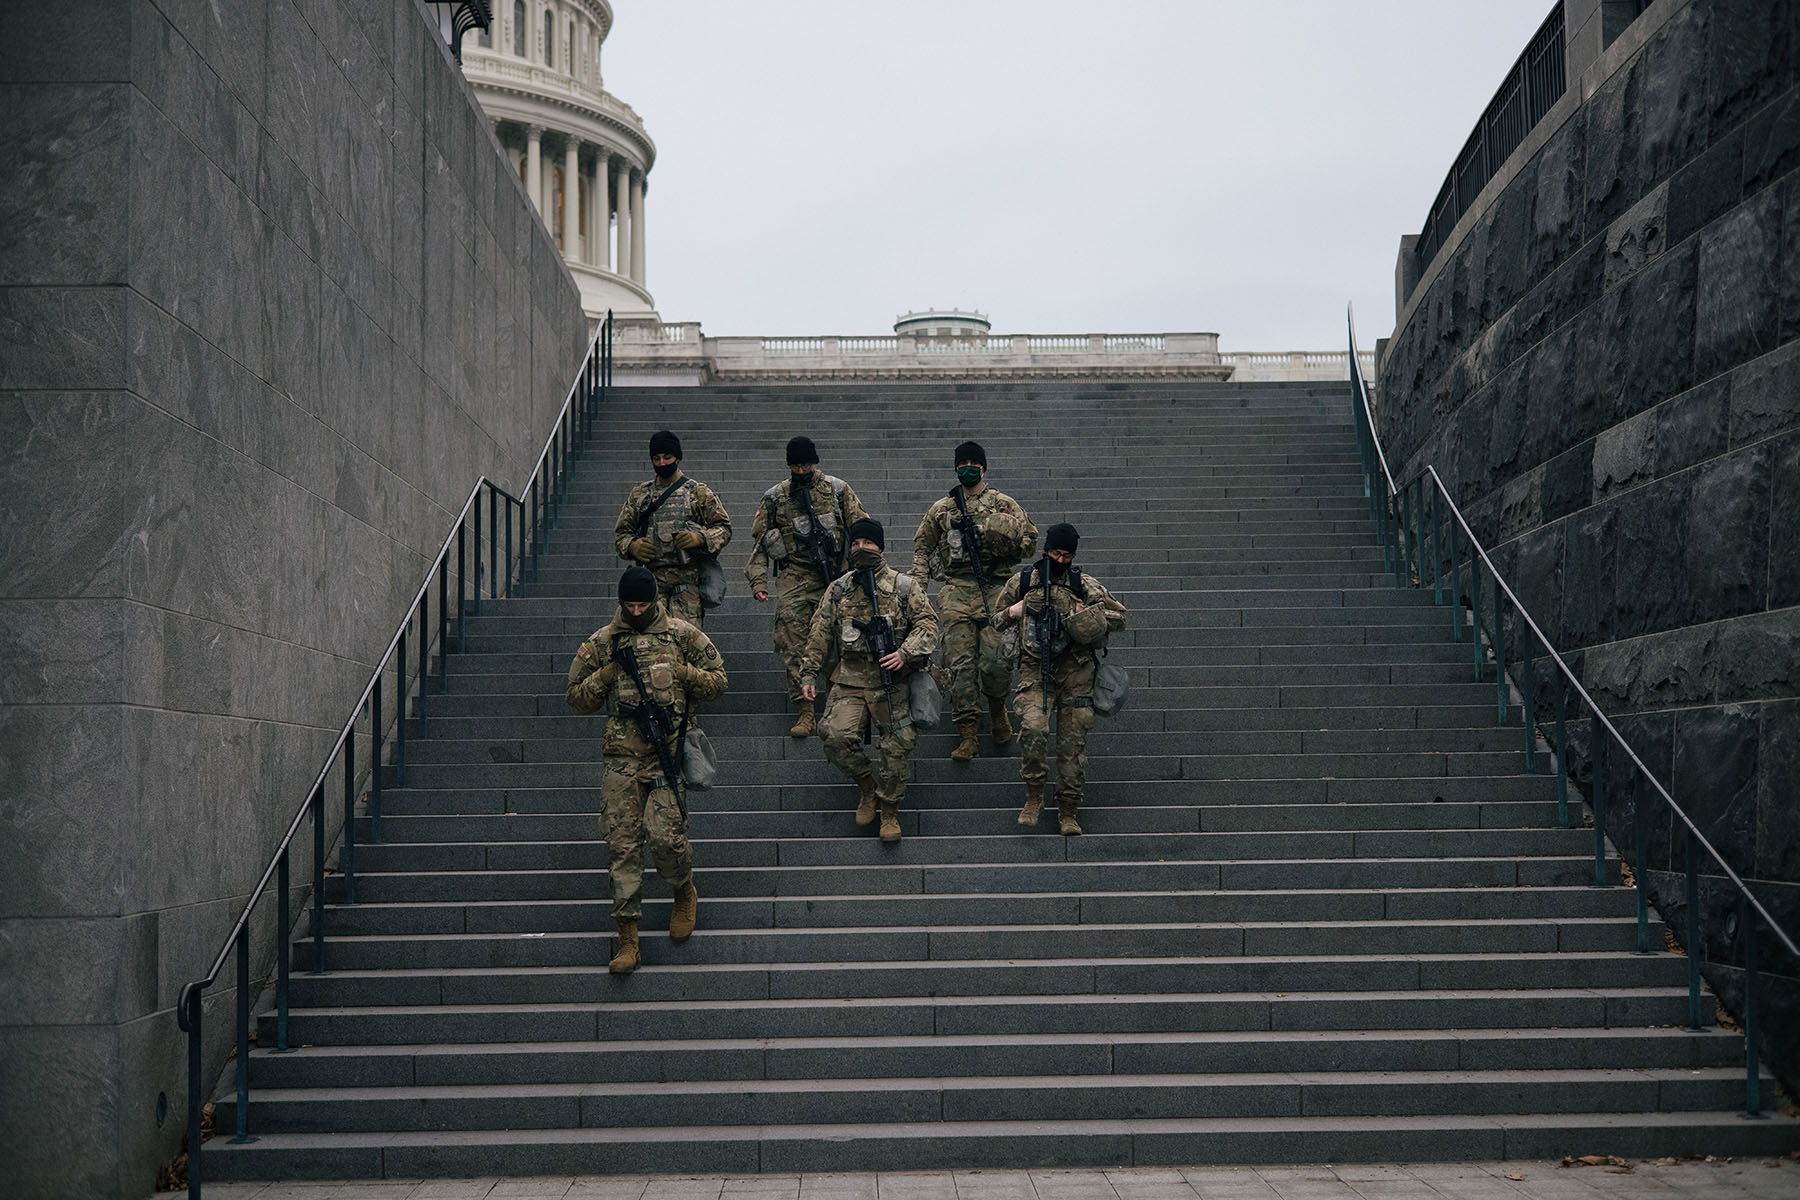 National Guard soldiers walk across the U.S. Capitol during a shift change.